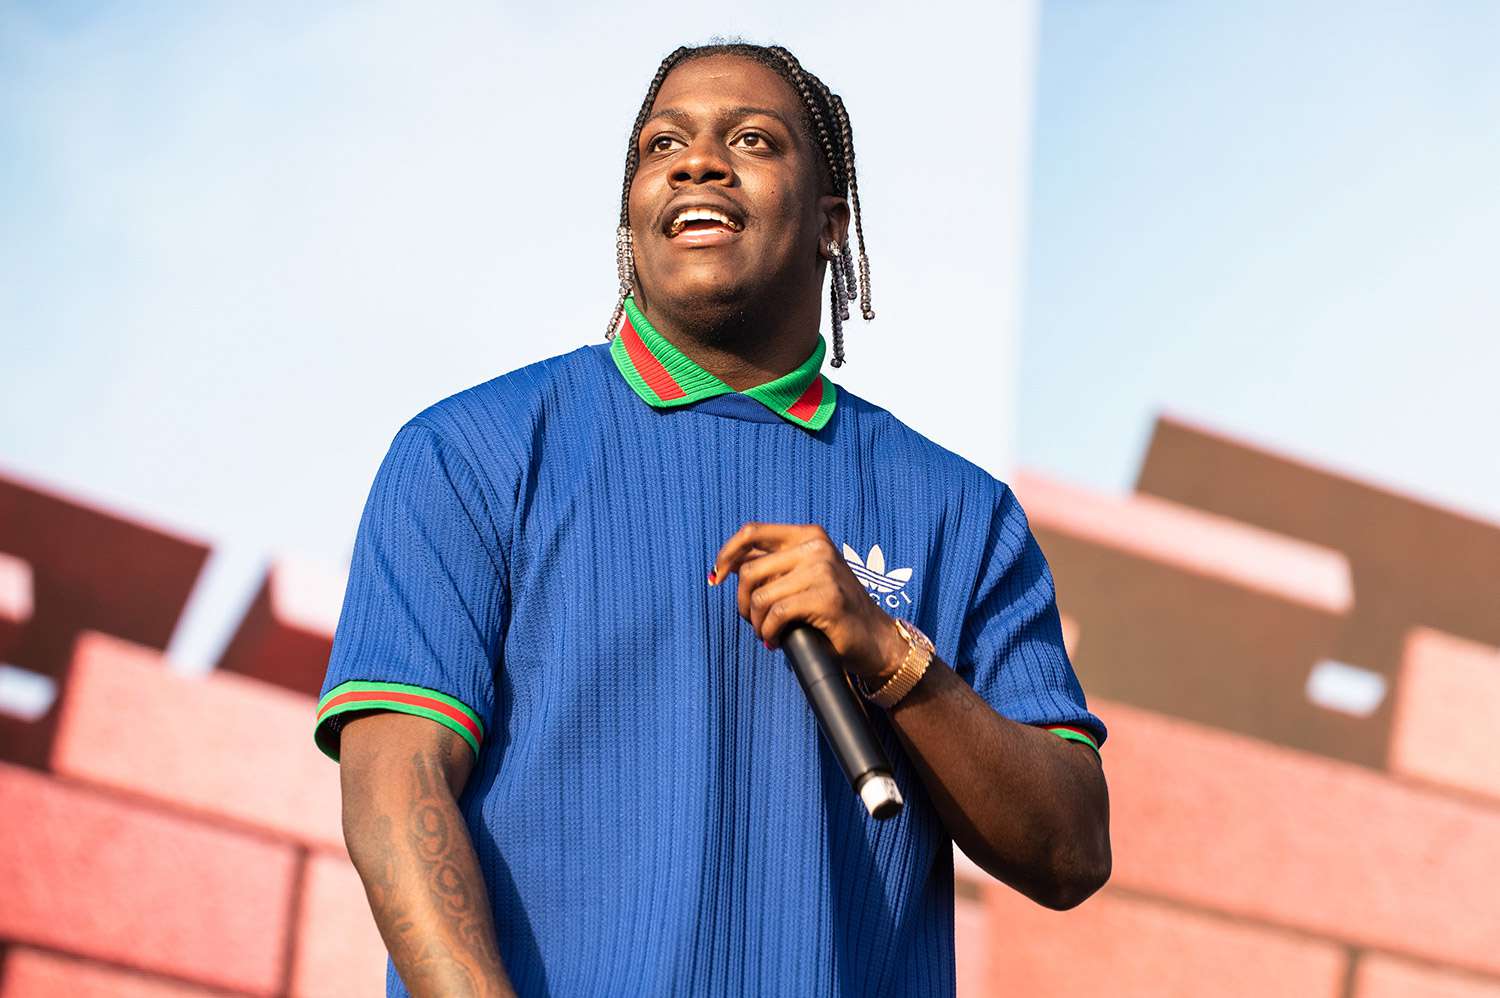 CHICAGO, ILLINOIS - JUNE 19: Lil Yachty performs on stage at the 2022 Summer Smash festival at Douglass Park on June 19, 2022 in Chicago, Illinois. (Photo by Timothy Hiatt/Getty Images)